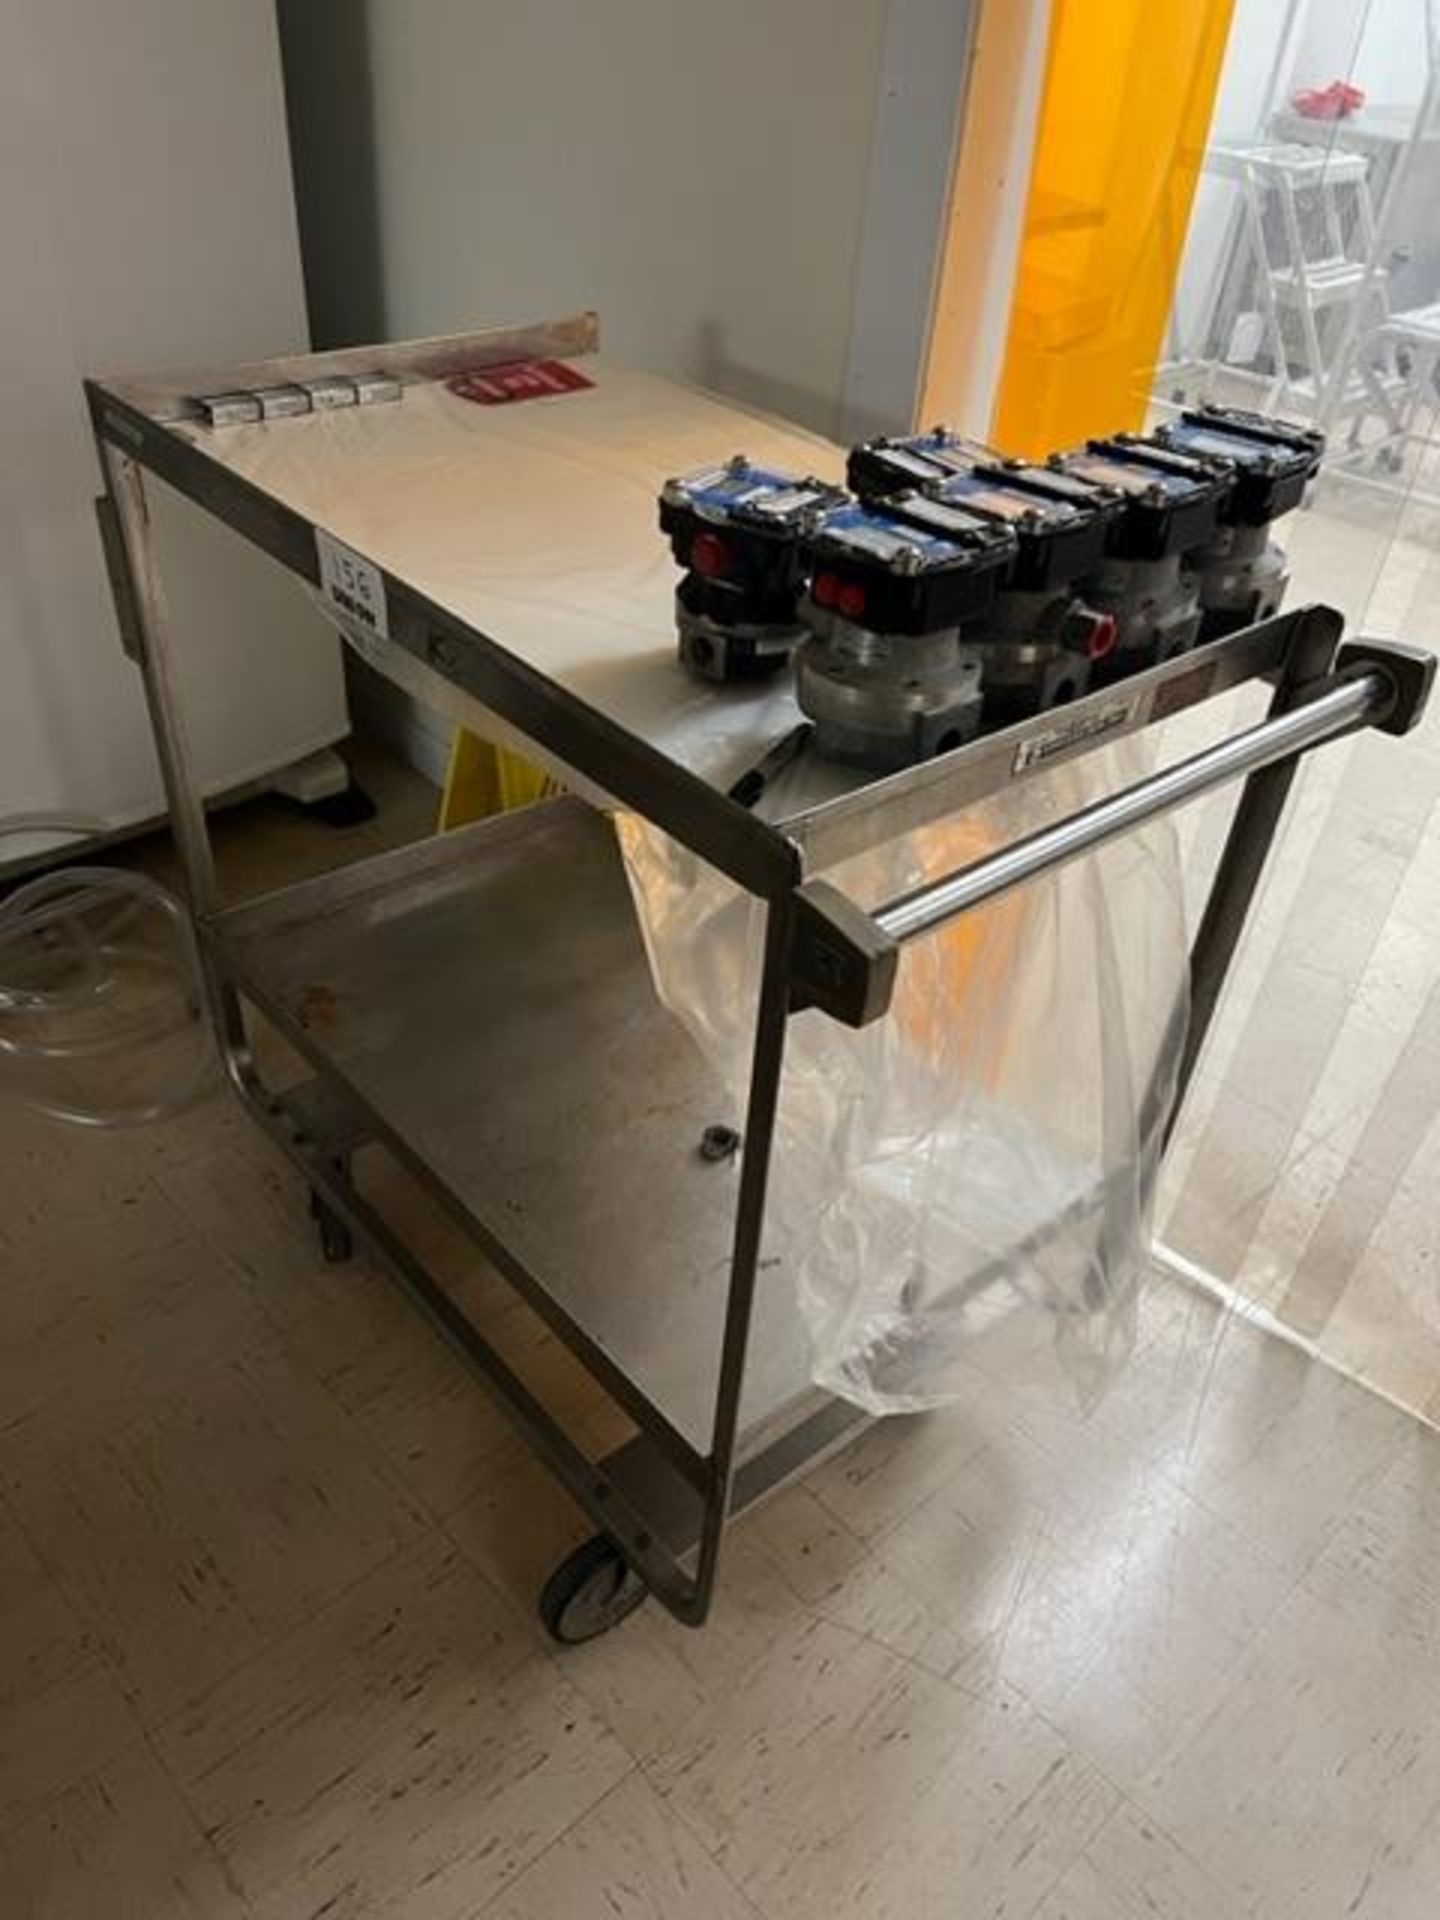 Asset 156 - Two shelf SS cart 33" x 21" on casters with 6 digital flow meters. $345.00 Rigged and